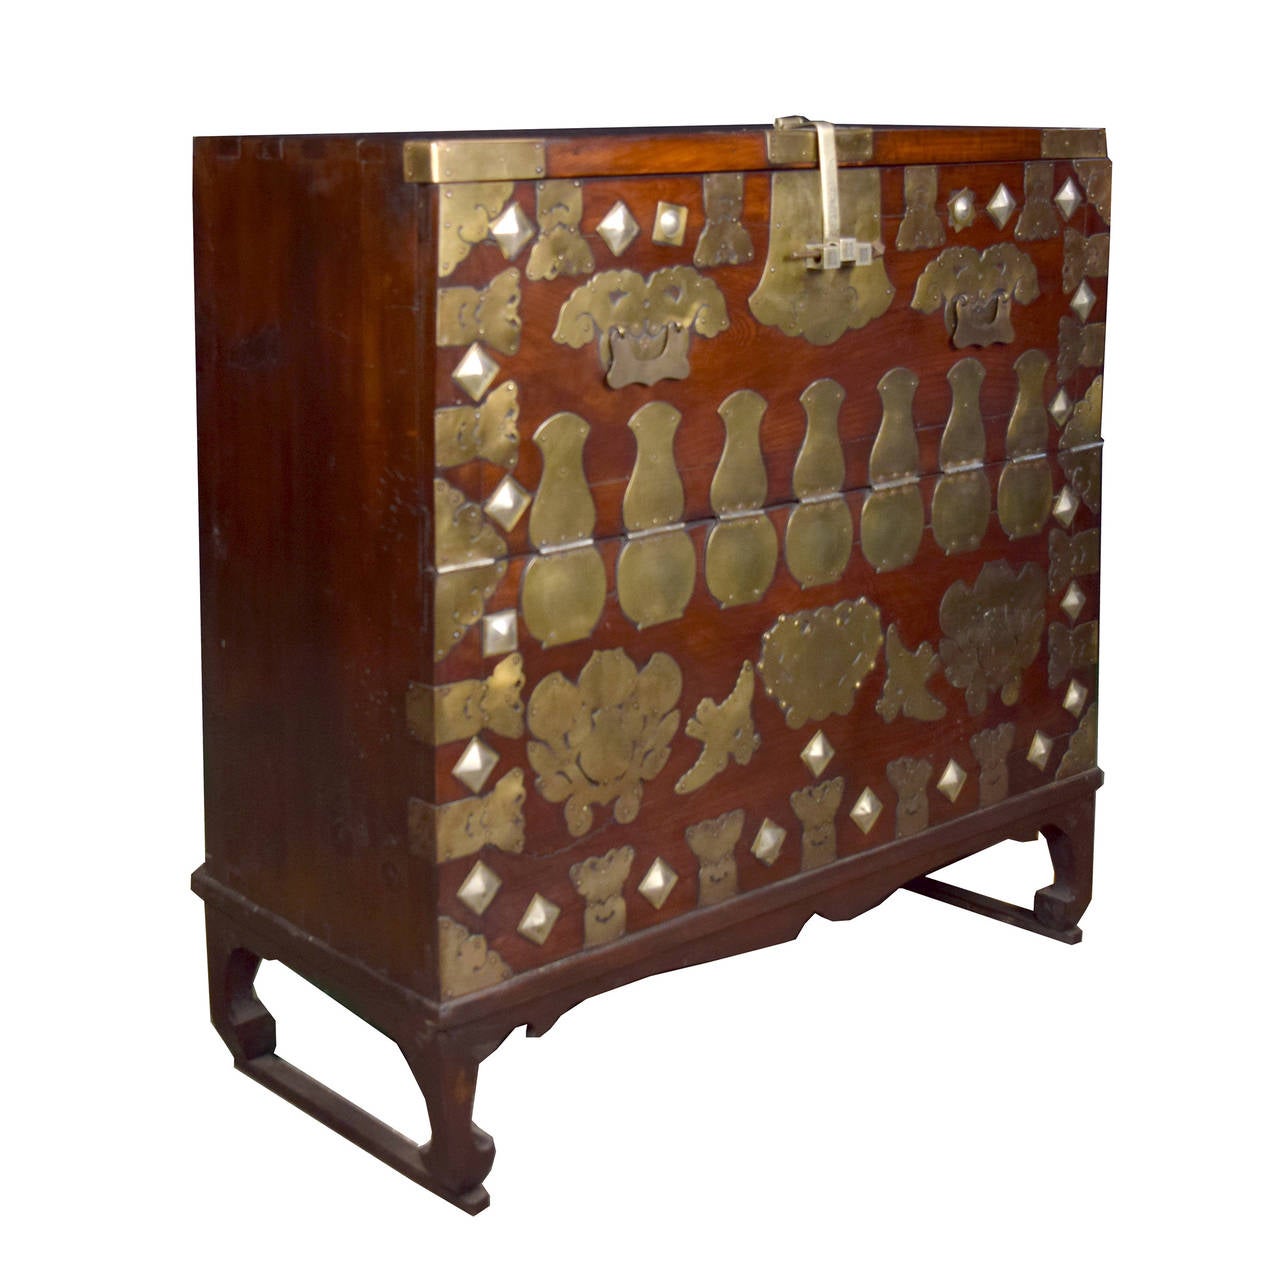 A c. 1900 hardwood wedding chest from Korea with brass hardware depicting butterflies and flowers. The fall front door features a lock engraved with the double happiness symbol.

Pagoda Red Collection # CMKH013